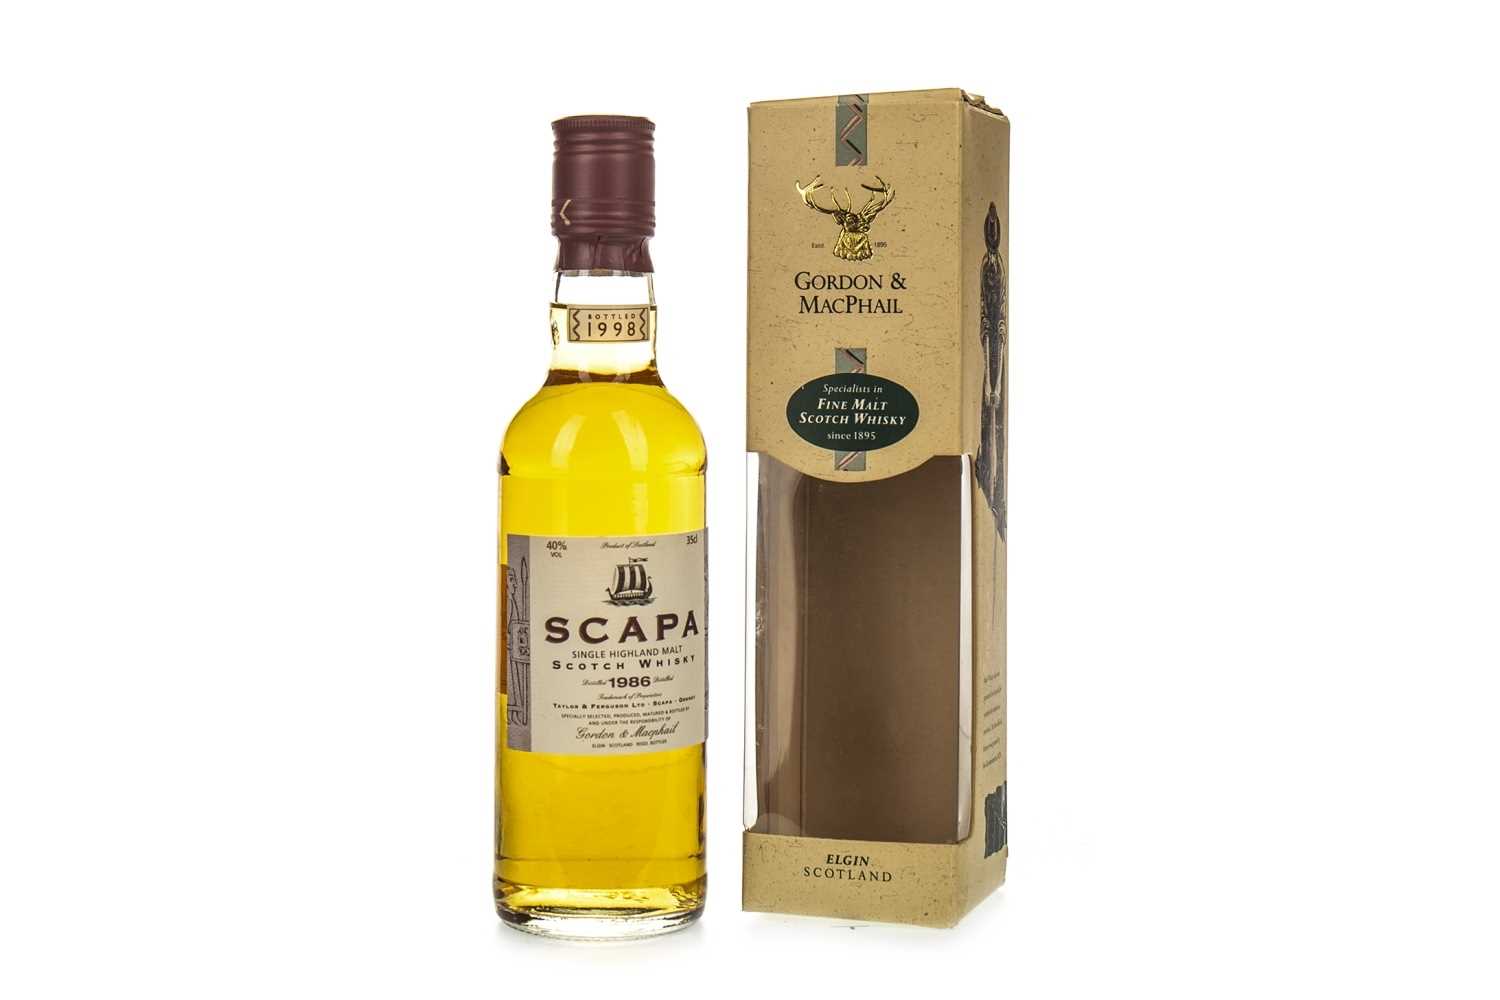 Lot 1315 - SCAPA 1986 - 35CL